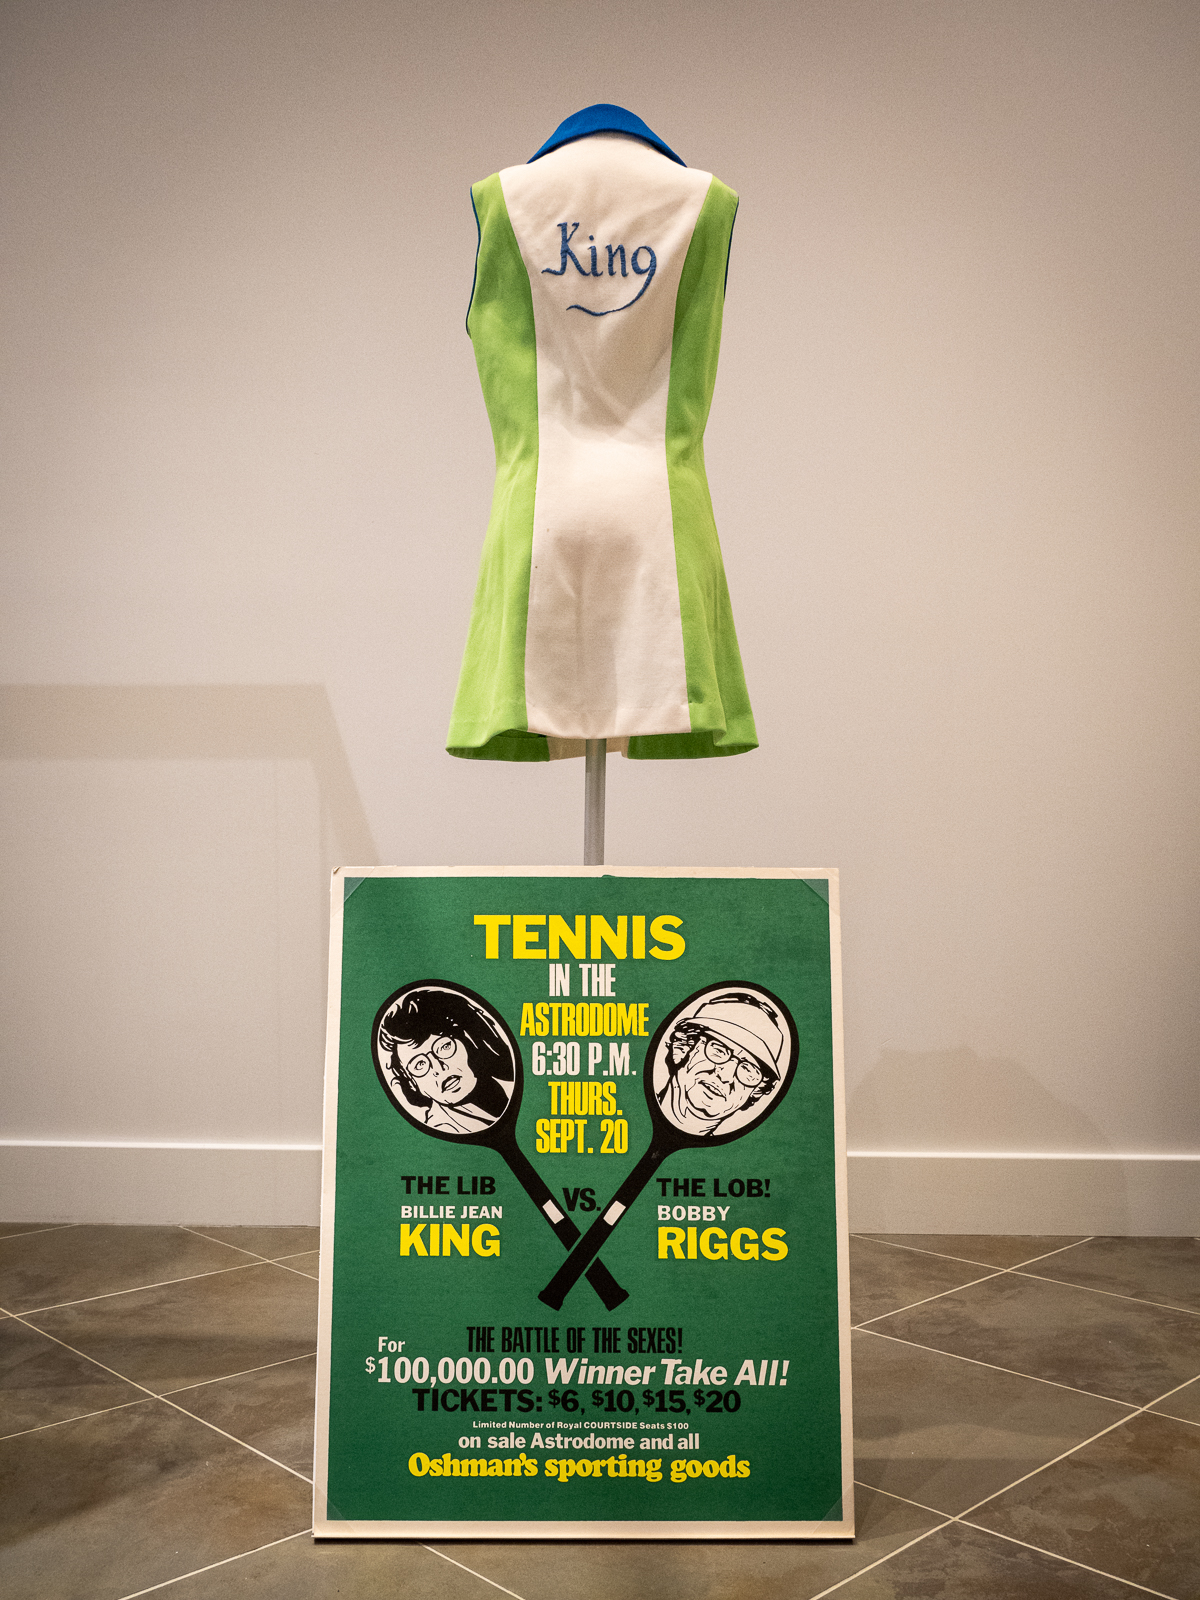 WorldTeam Tennis dress worn by Billie Jean King in 1974. On loan from the International Tennis Hall of Fame Museum.Poster advertising the “Battle of the Sexes” between Billie Jean King and Bobby Riggs, 1973.